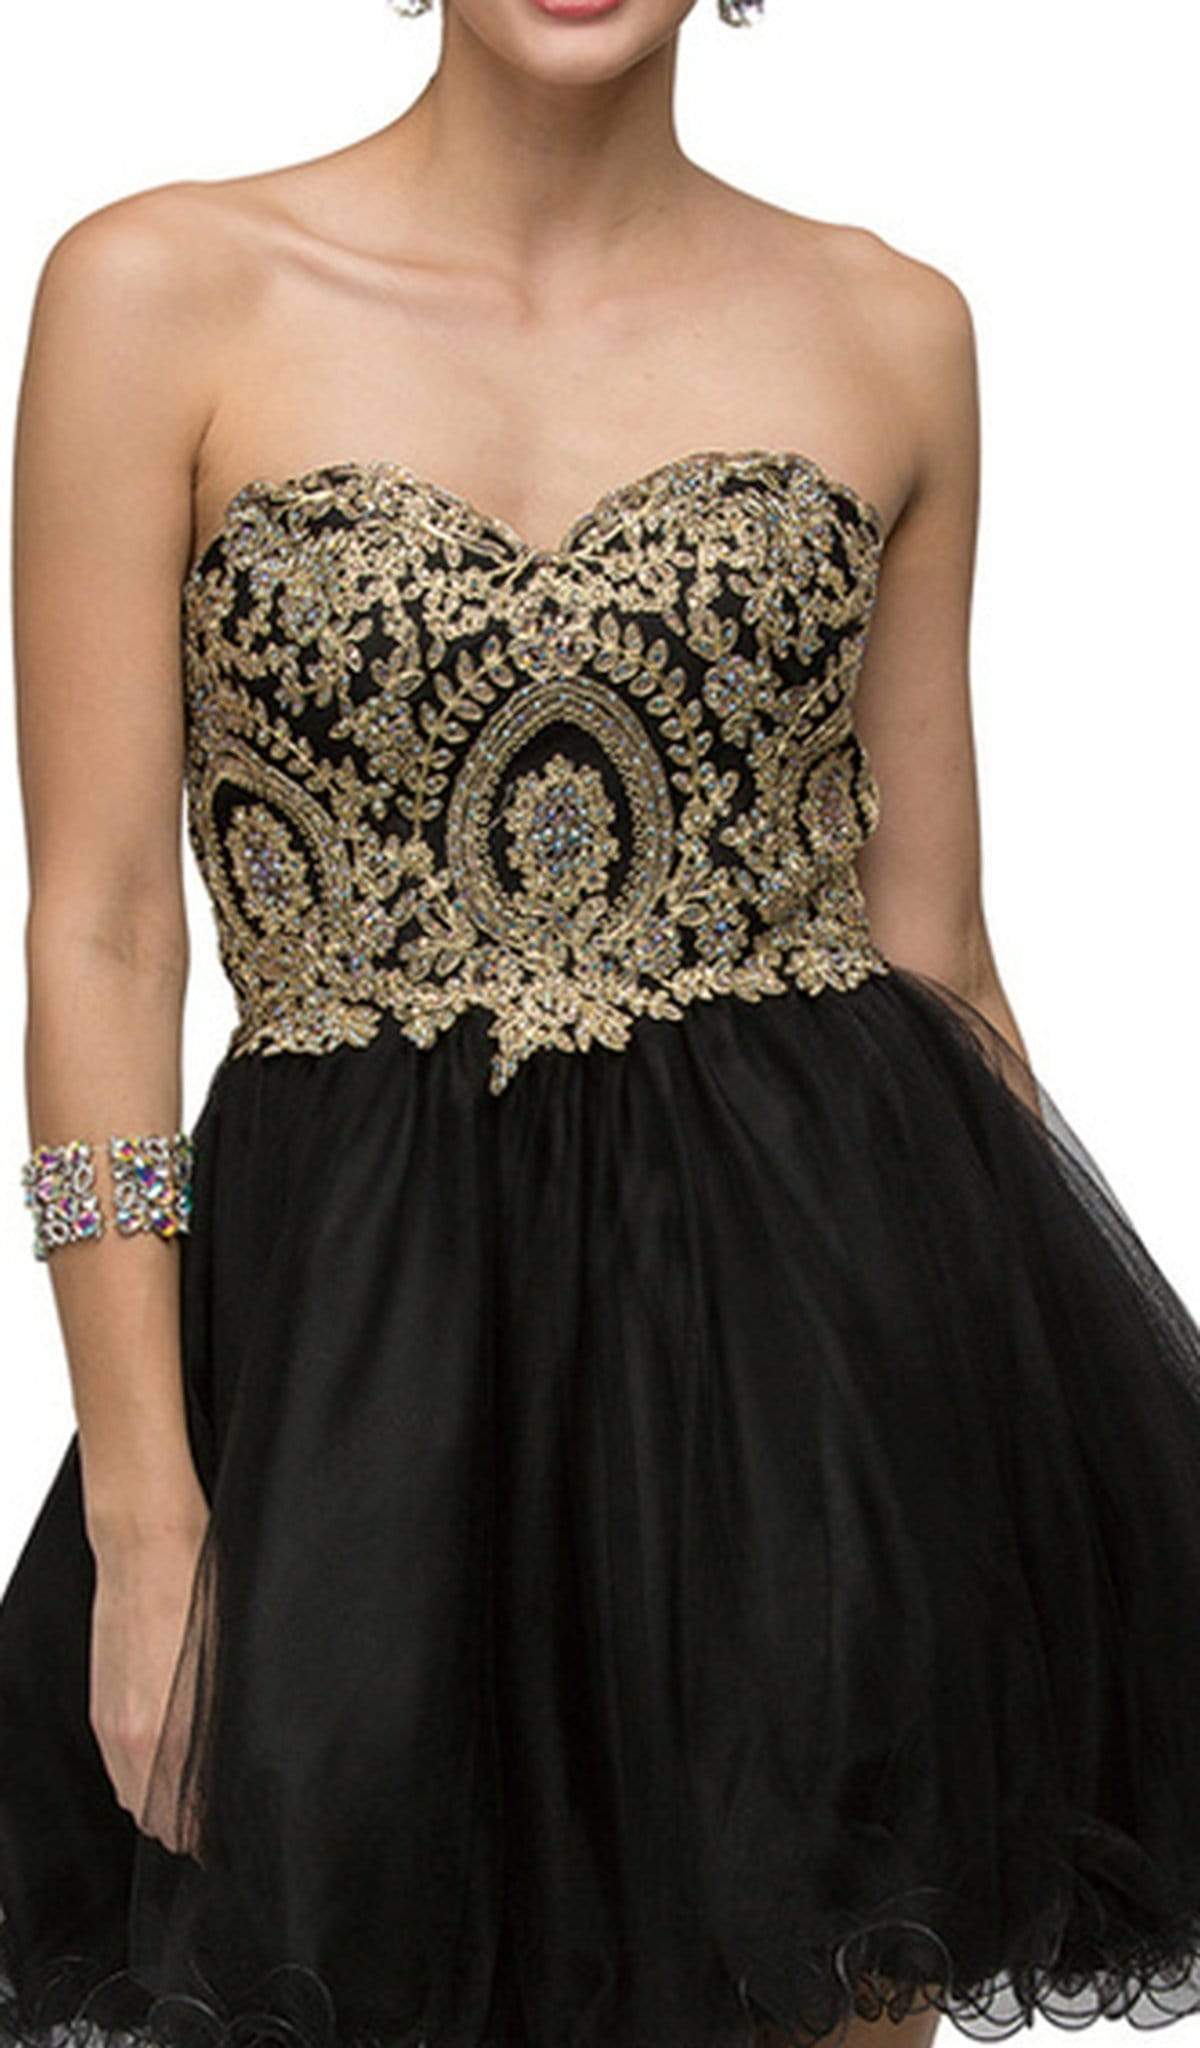 Dancing Queen - 9100 Strapless Embroidered Corset Short Prom Dress Prom Dresses